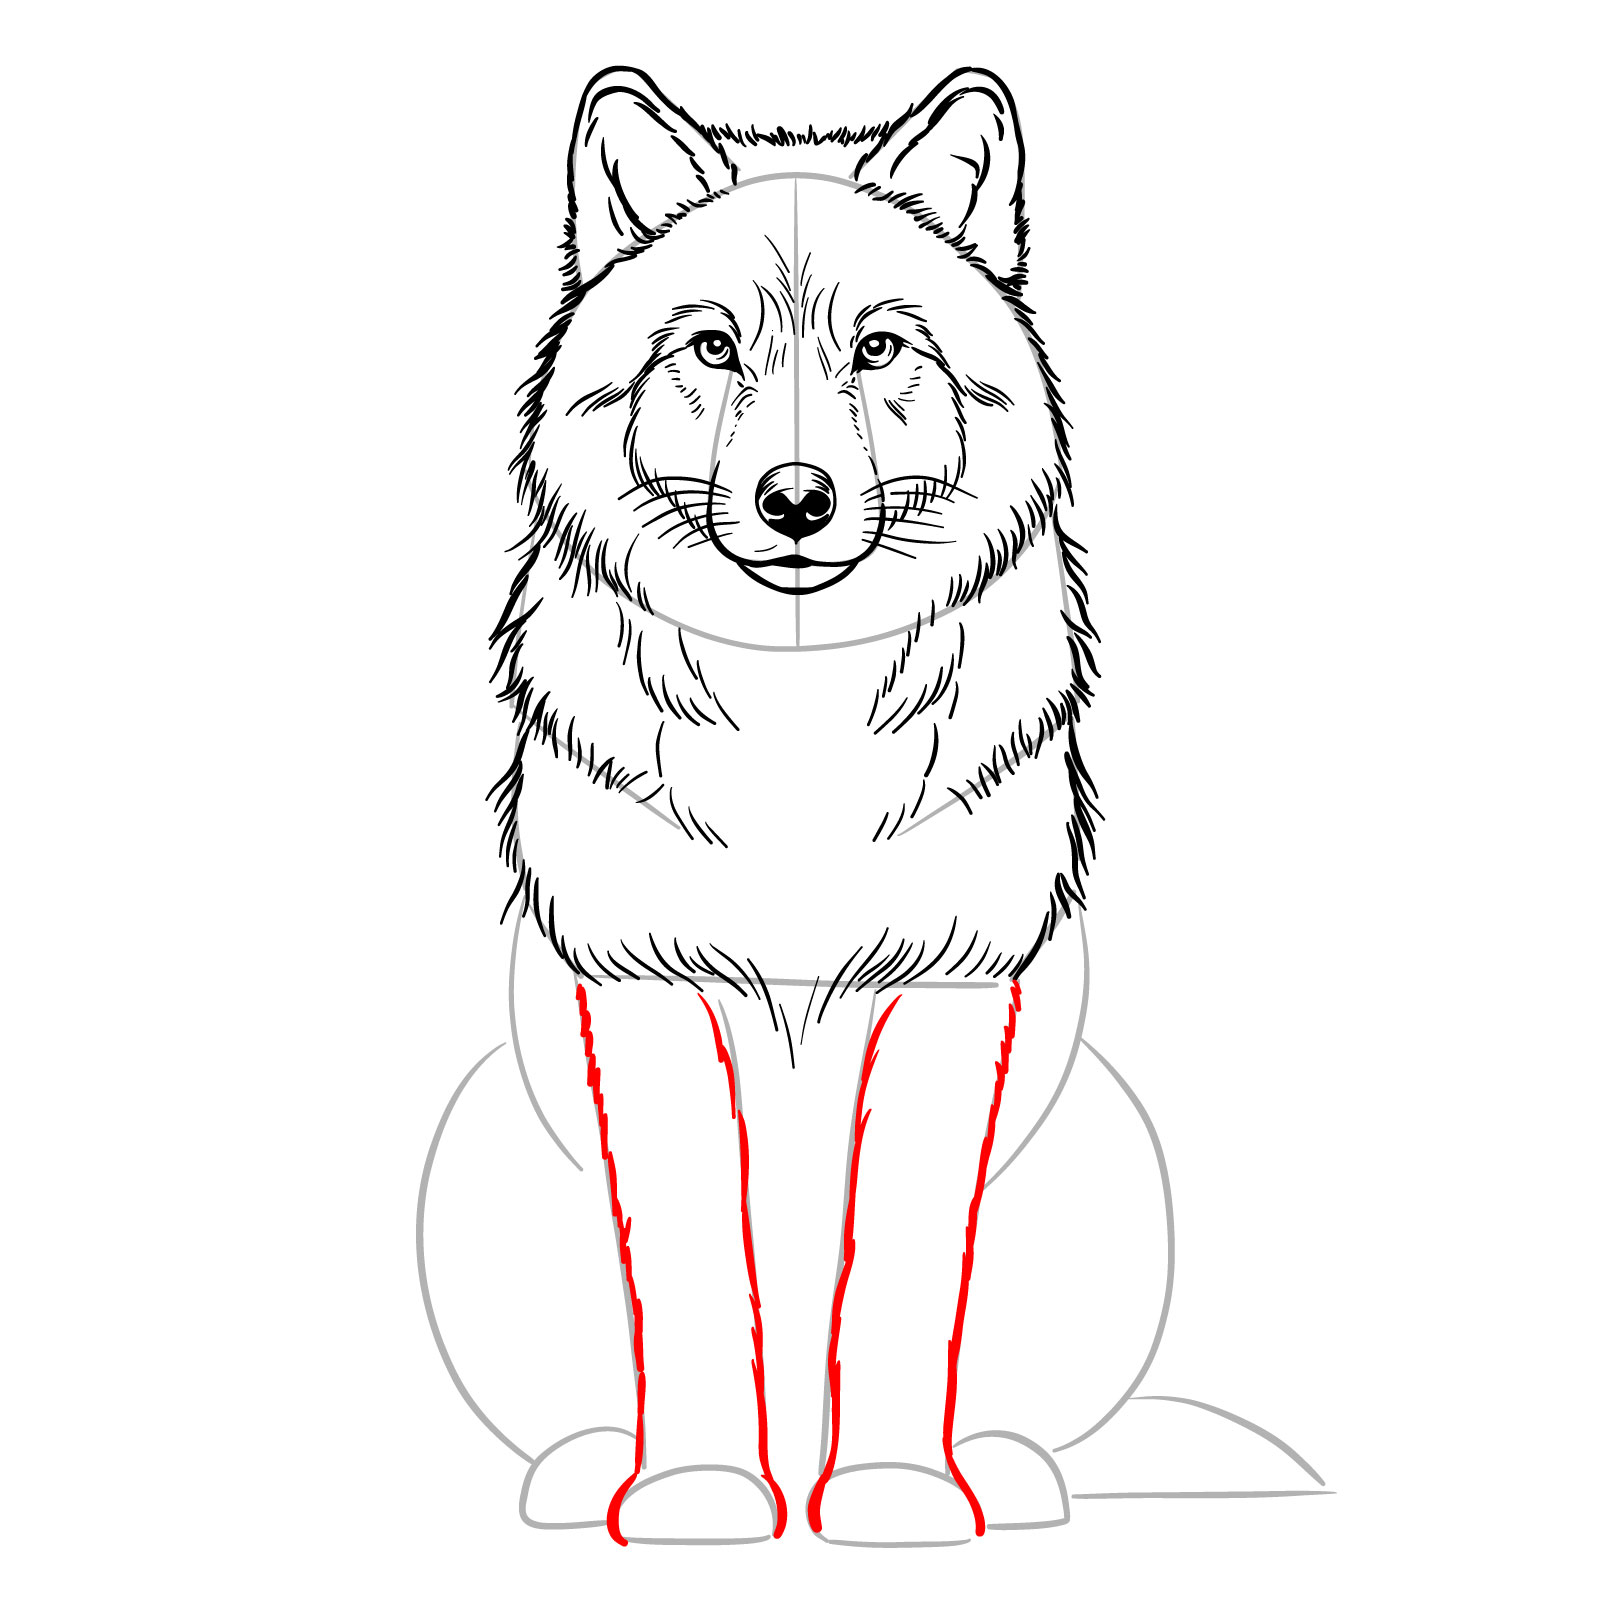 Outlining the front legs and paws of a sitting wolf in a drawing - step 12